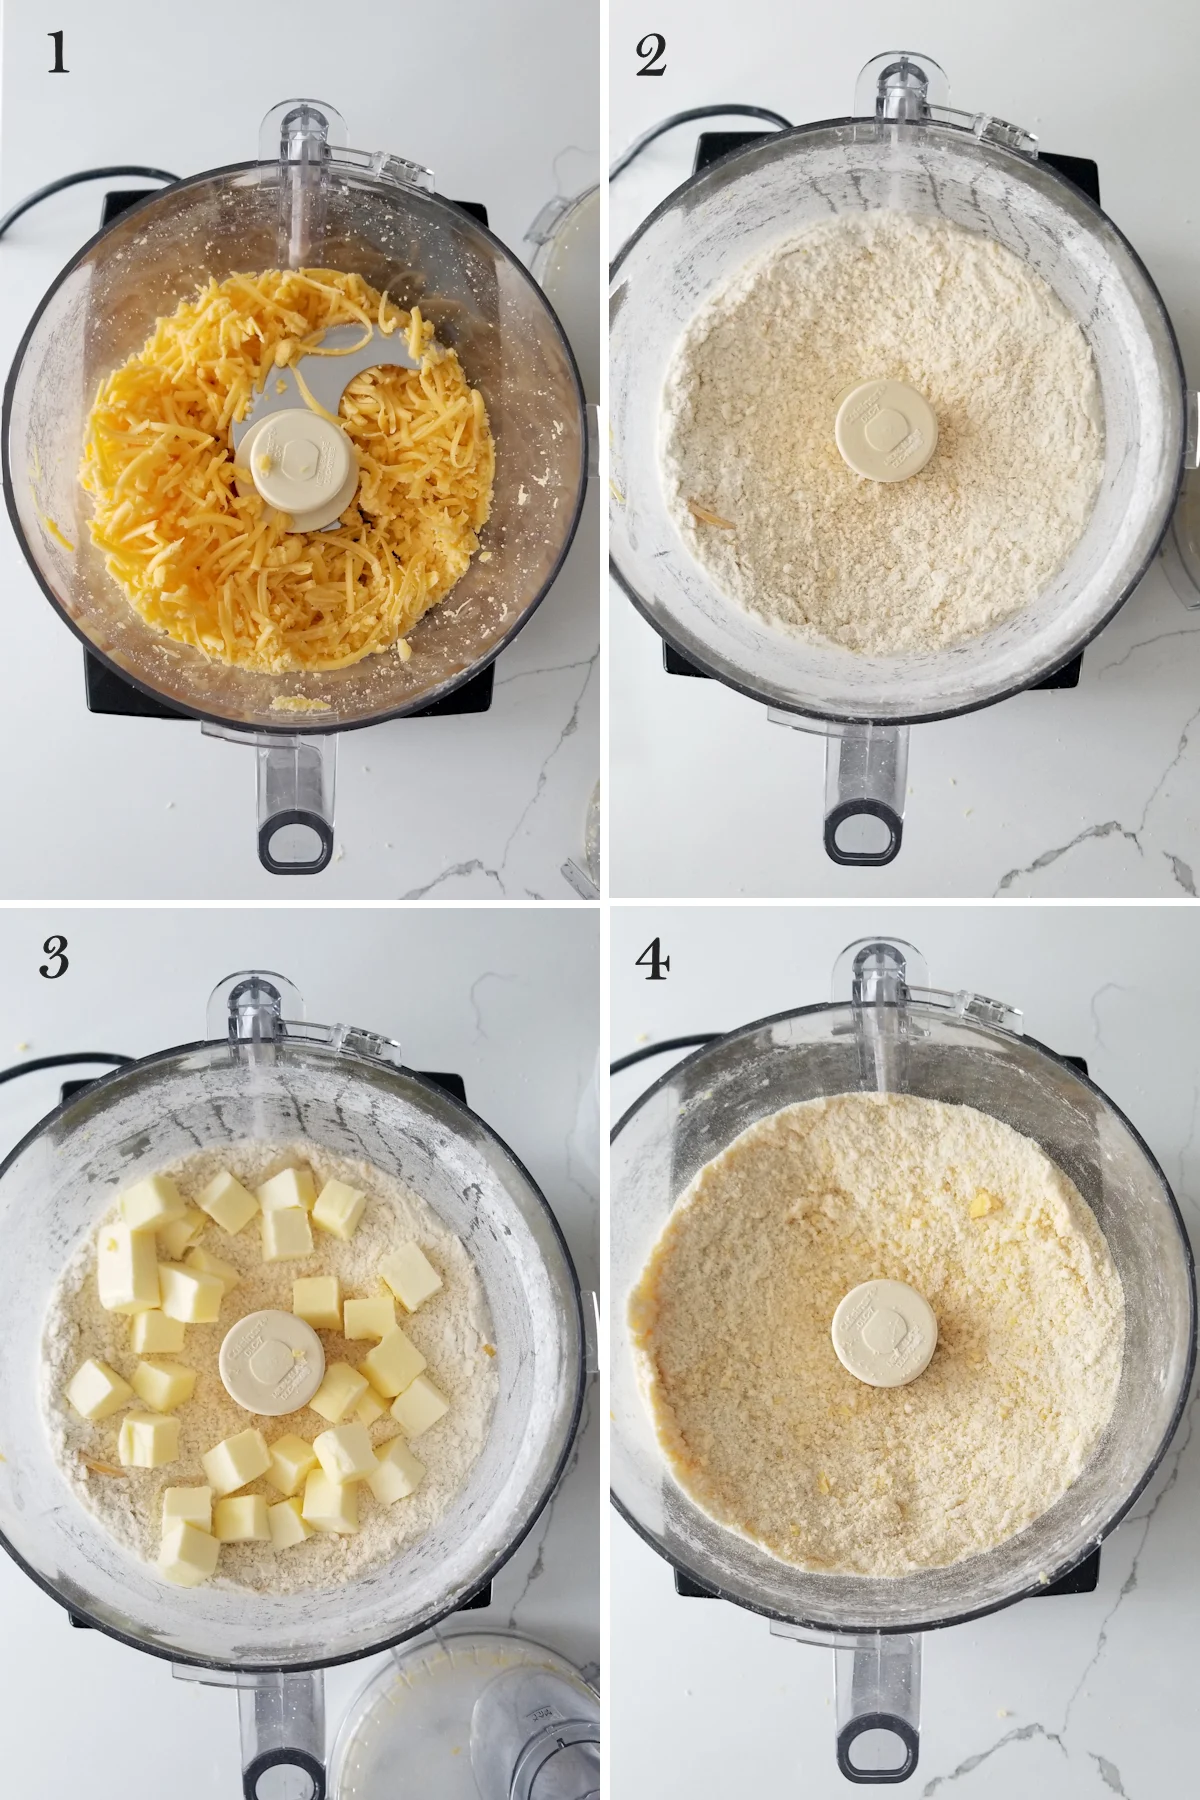 1. Shredded cheese in a food processor. 2. Flour added to the cheese. 3. Cubes of butter with flour mixture in food processor. 4. Butter mixed into flour.